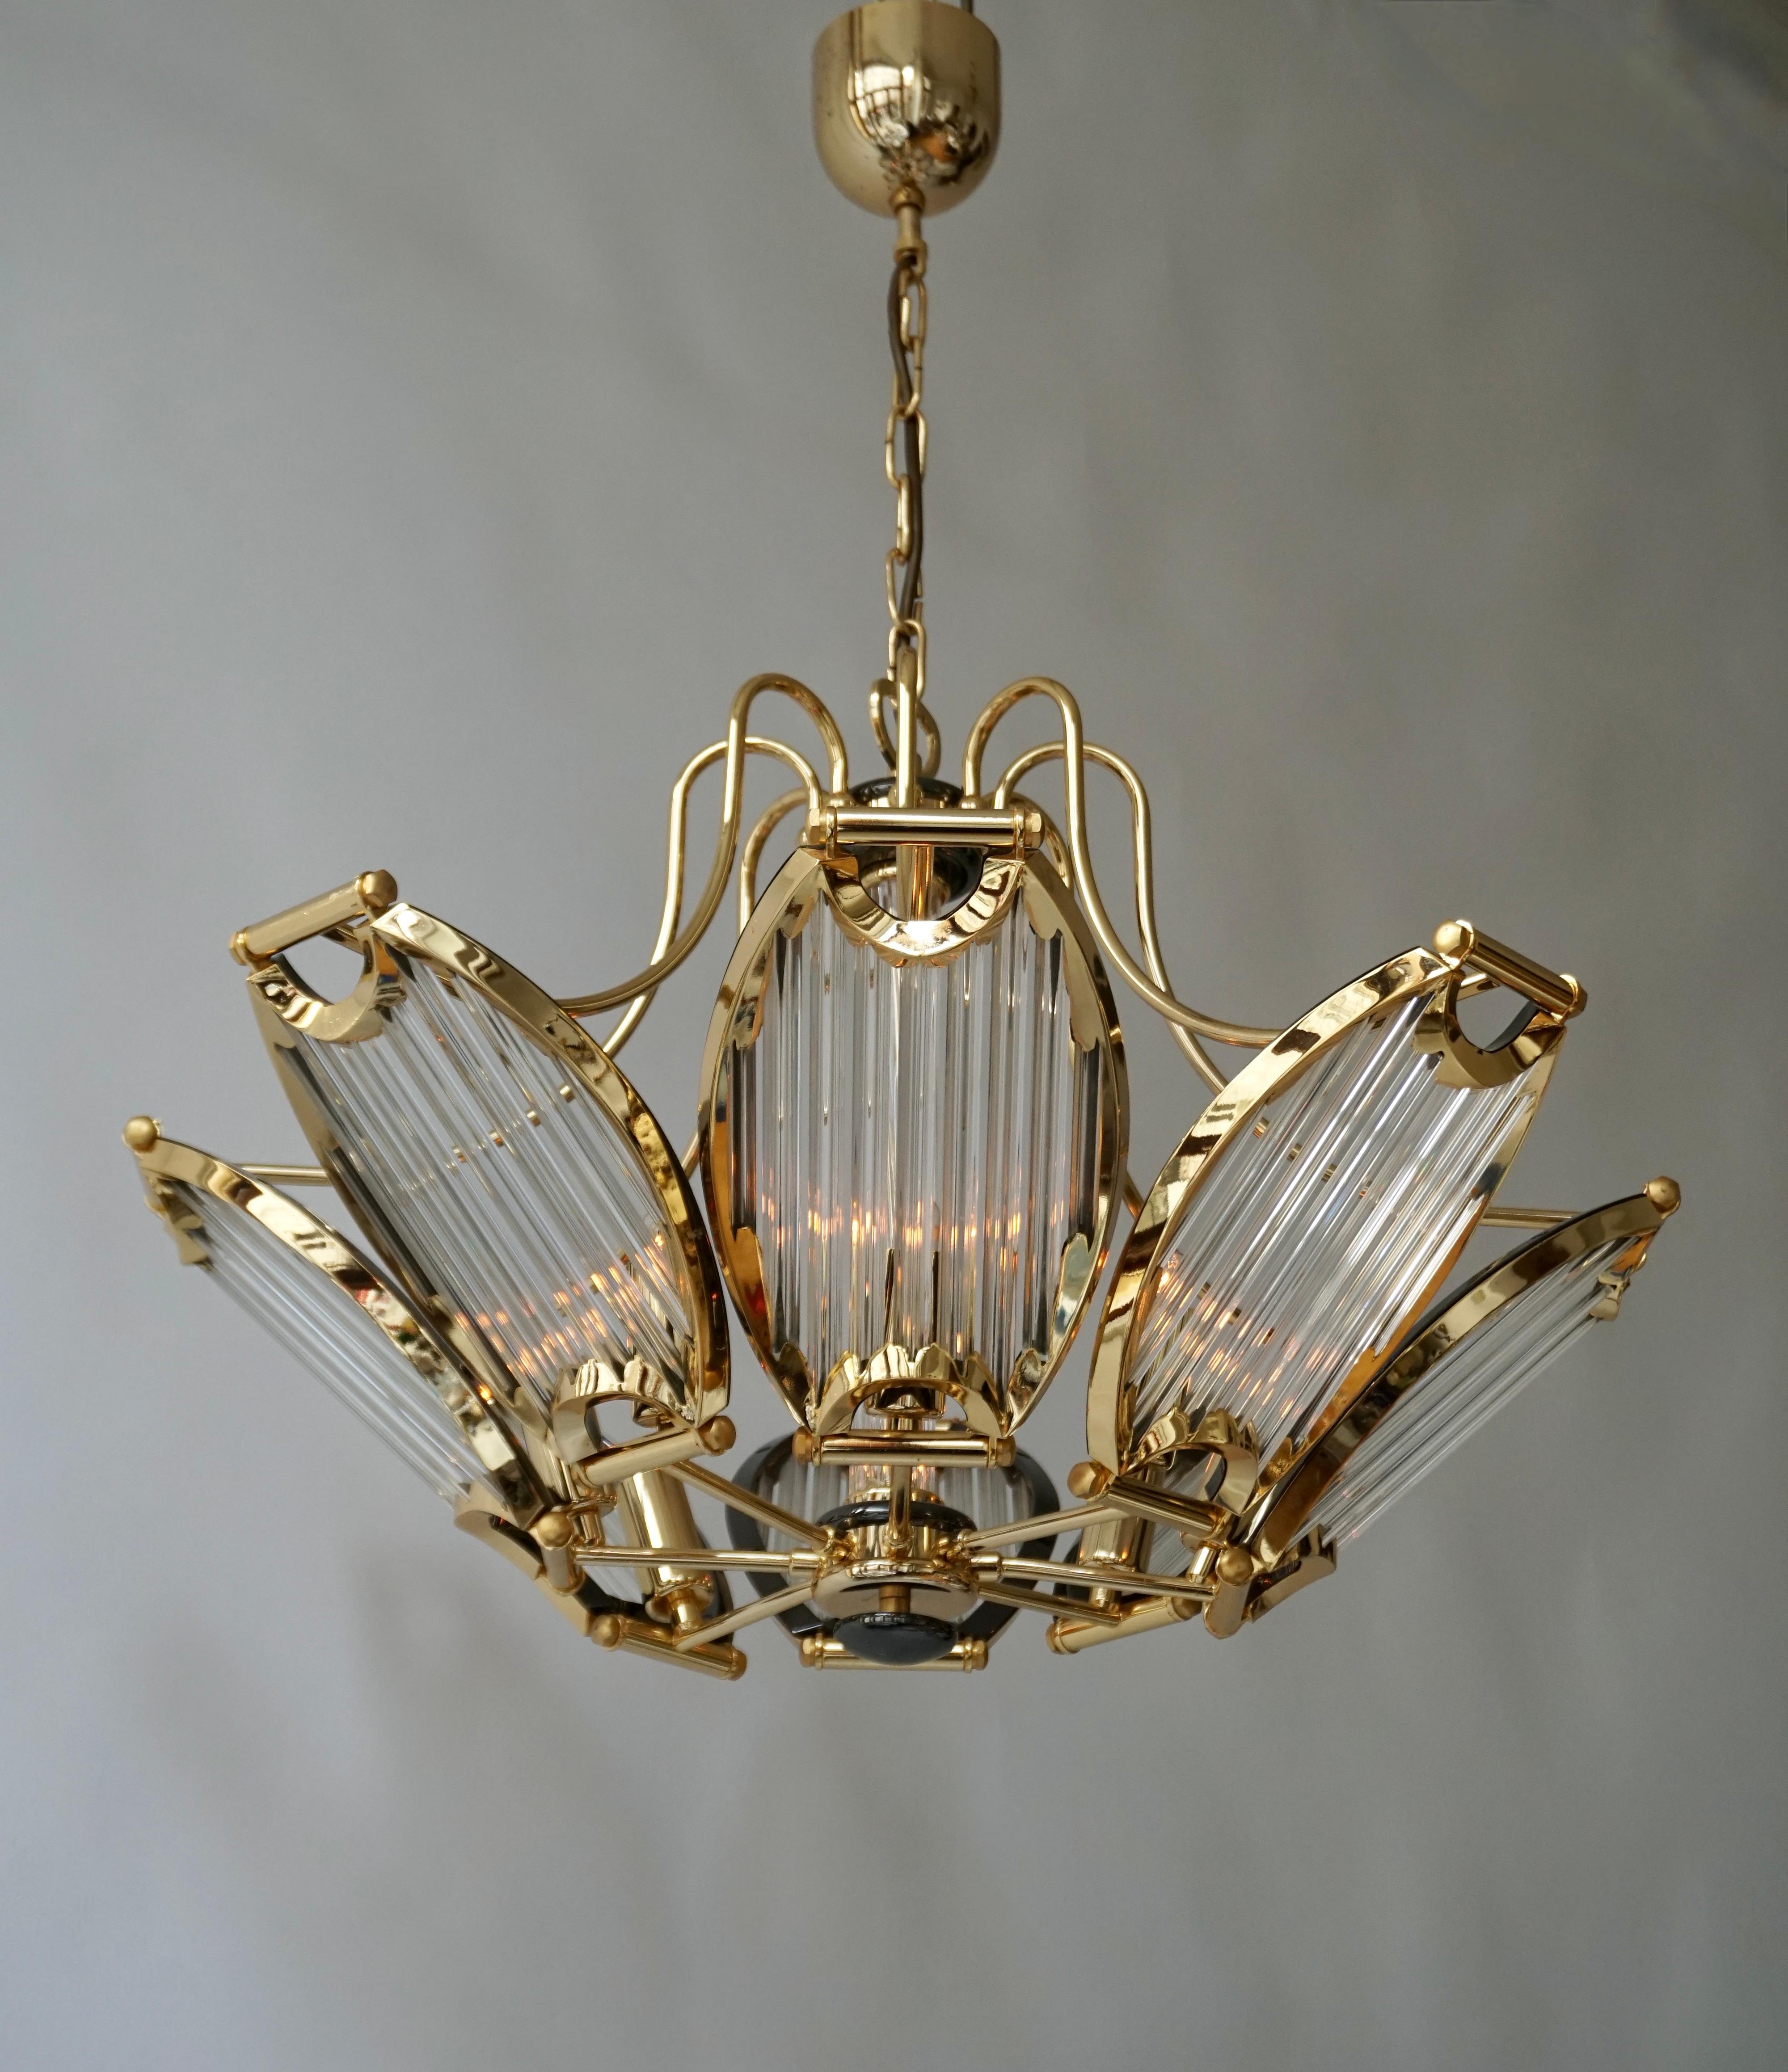 Gold-plated and crystal glass chandelier by Bakalowits.

Bakalowits
The Bakalowits company was founded in 1845 by Elias Bakalowits and they create stunning lights. Bakalowits is responsible for the biggest chandelier ever built. They did it for